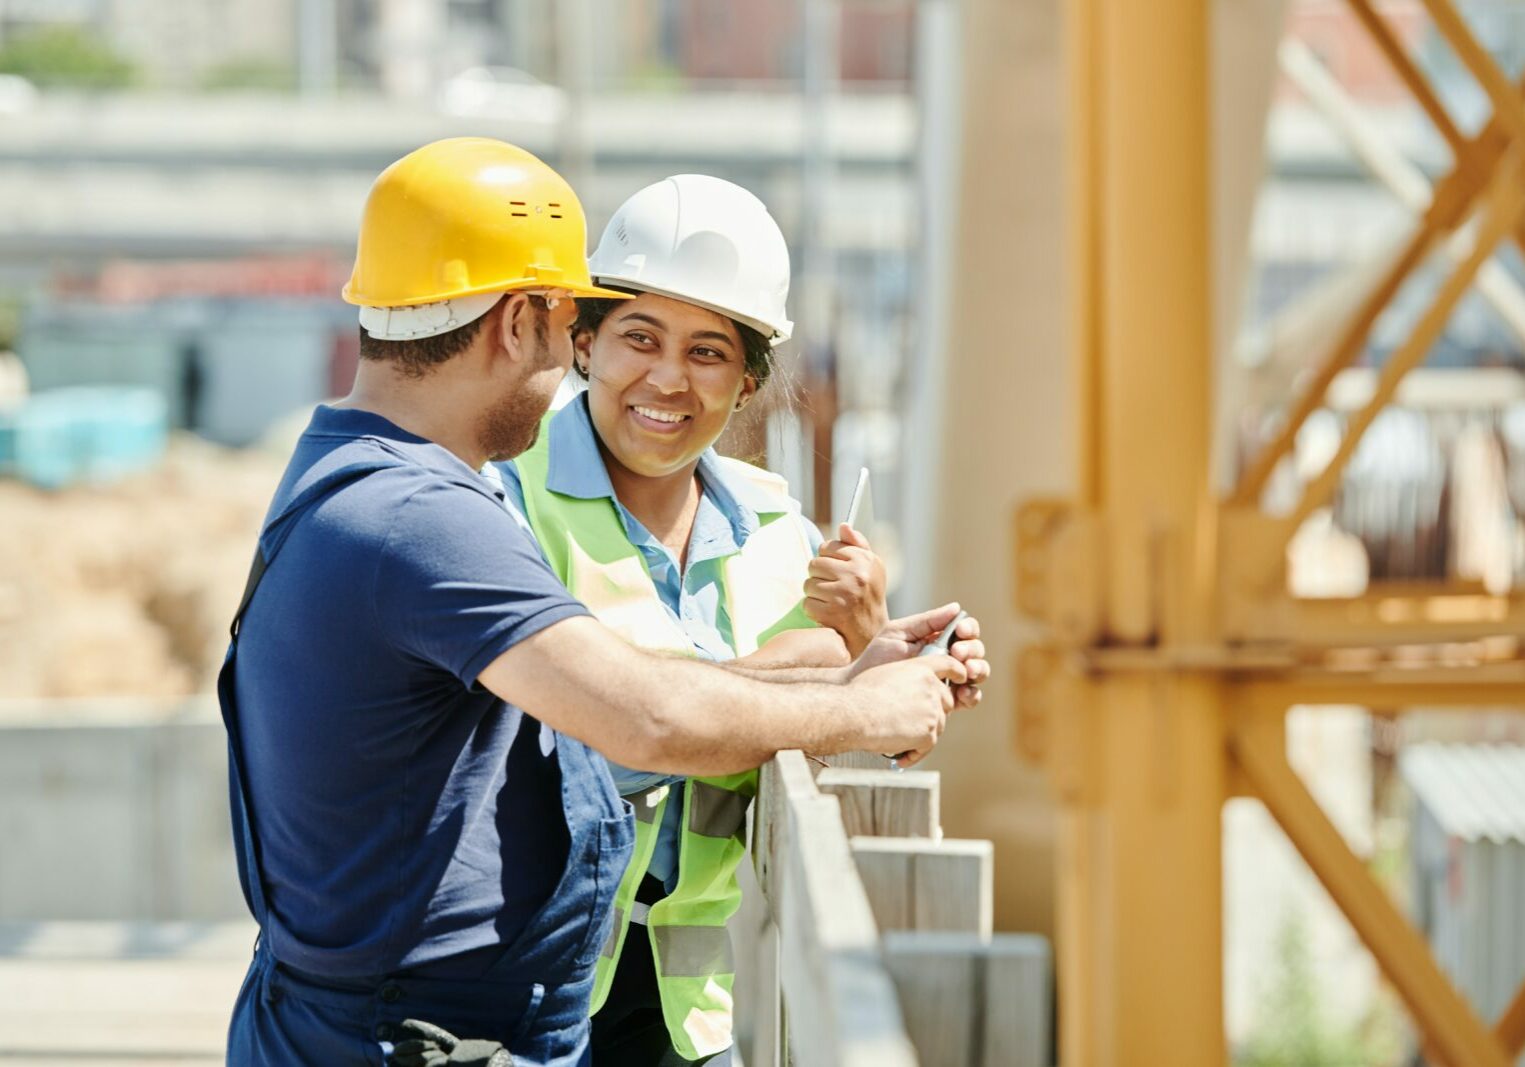 Two construction workers talking and smiling.